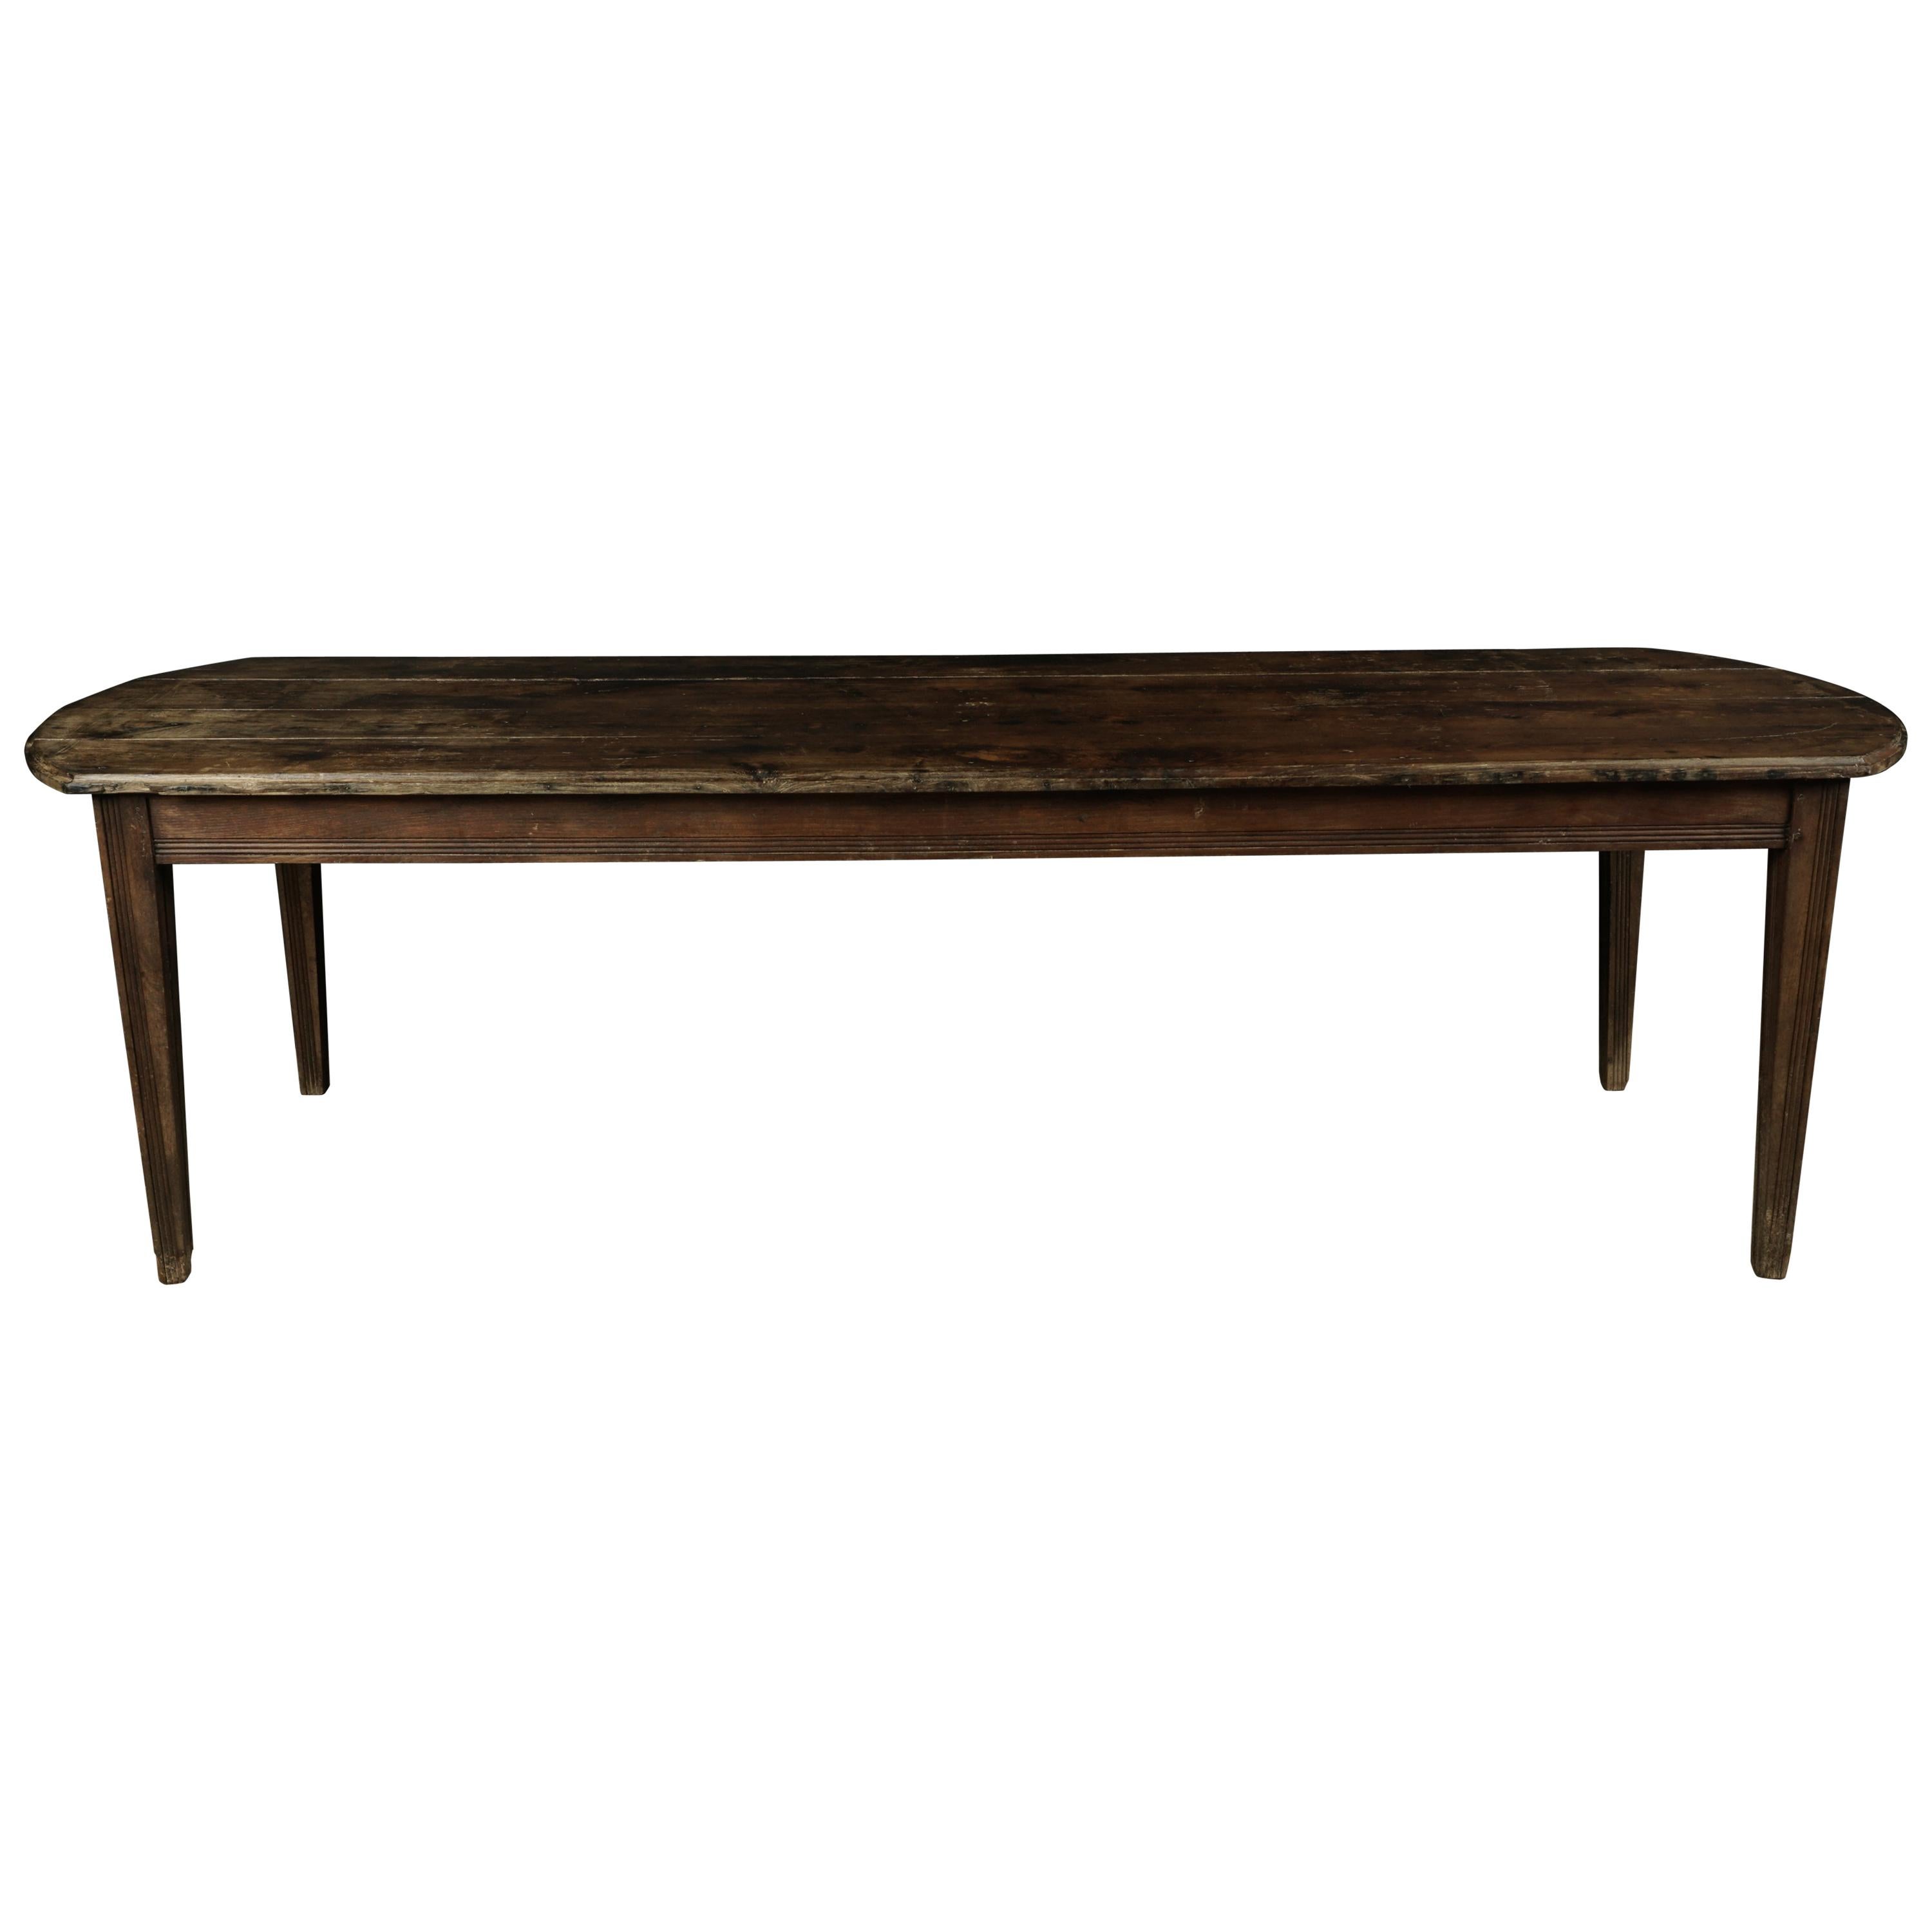 Large Farm Table from France, circa 1930